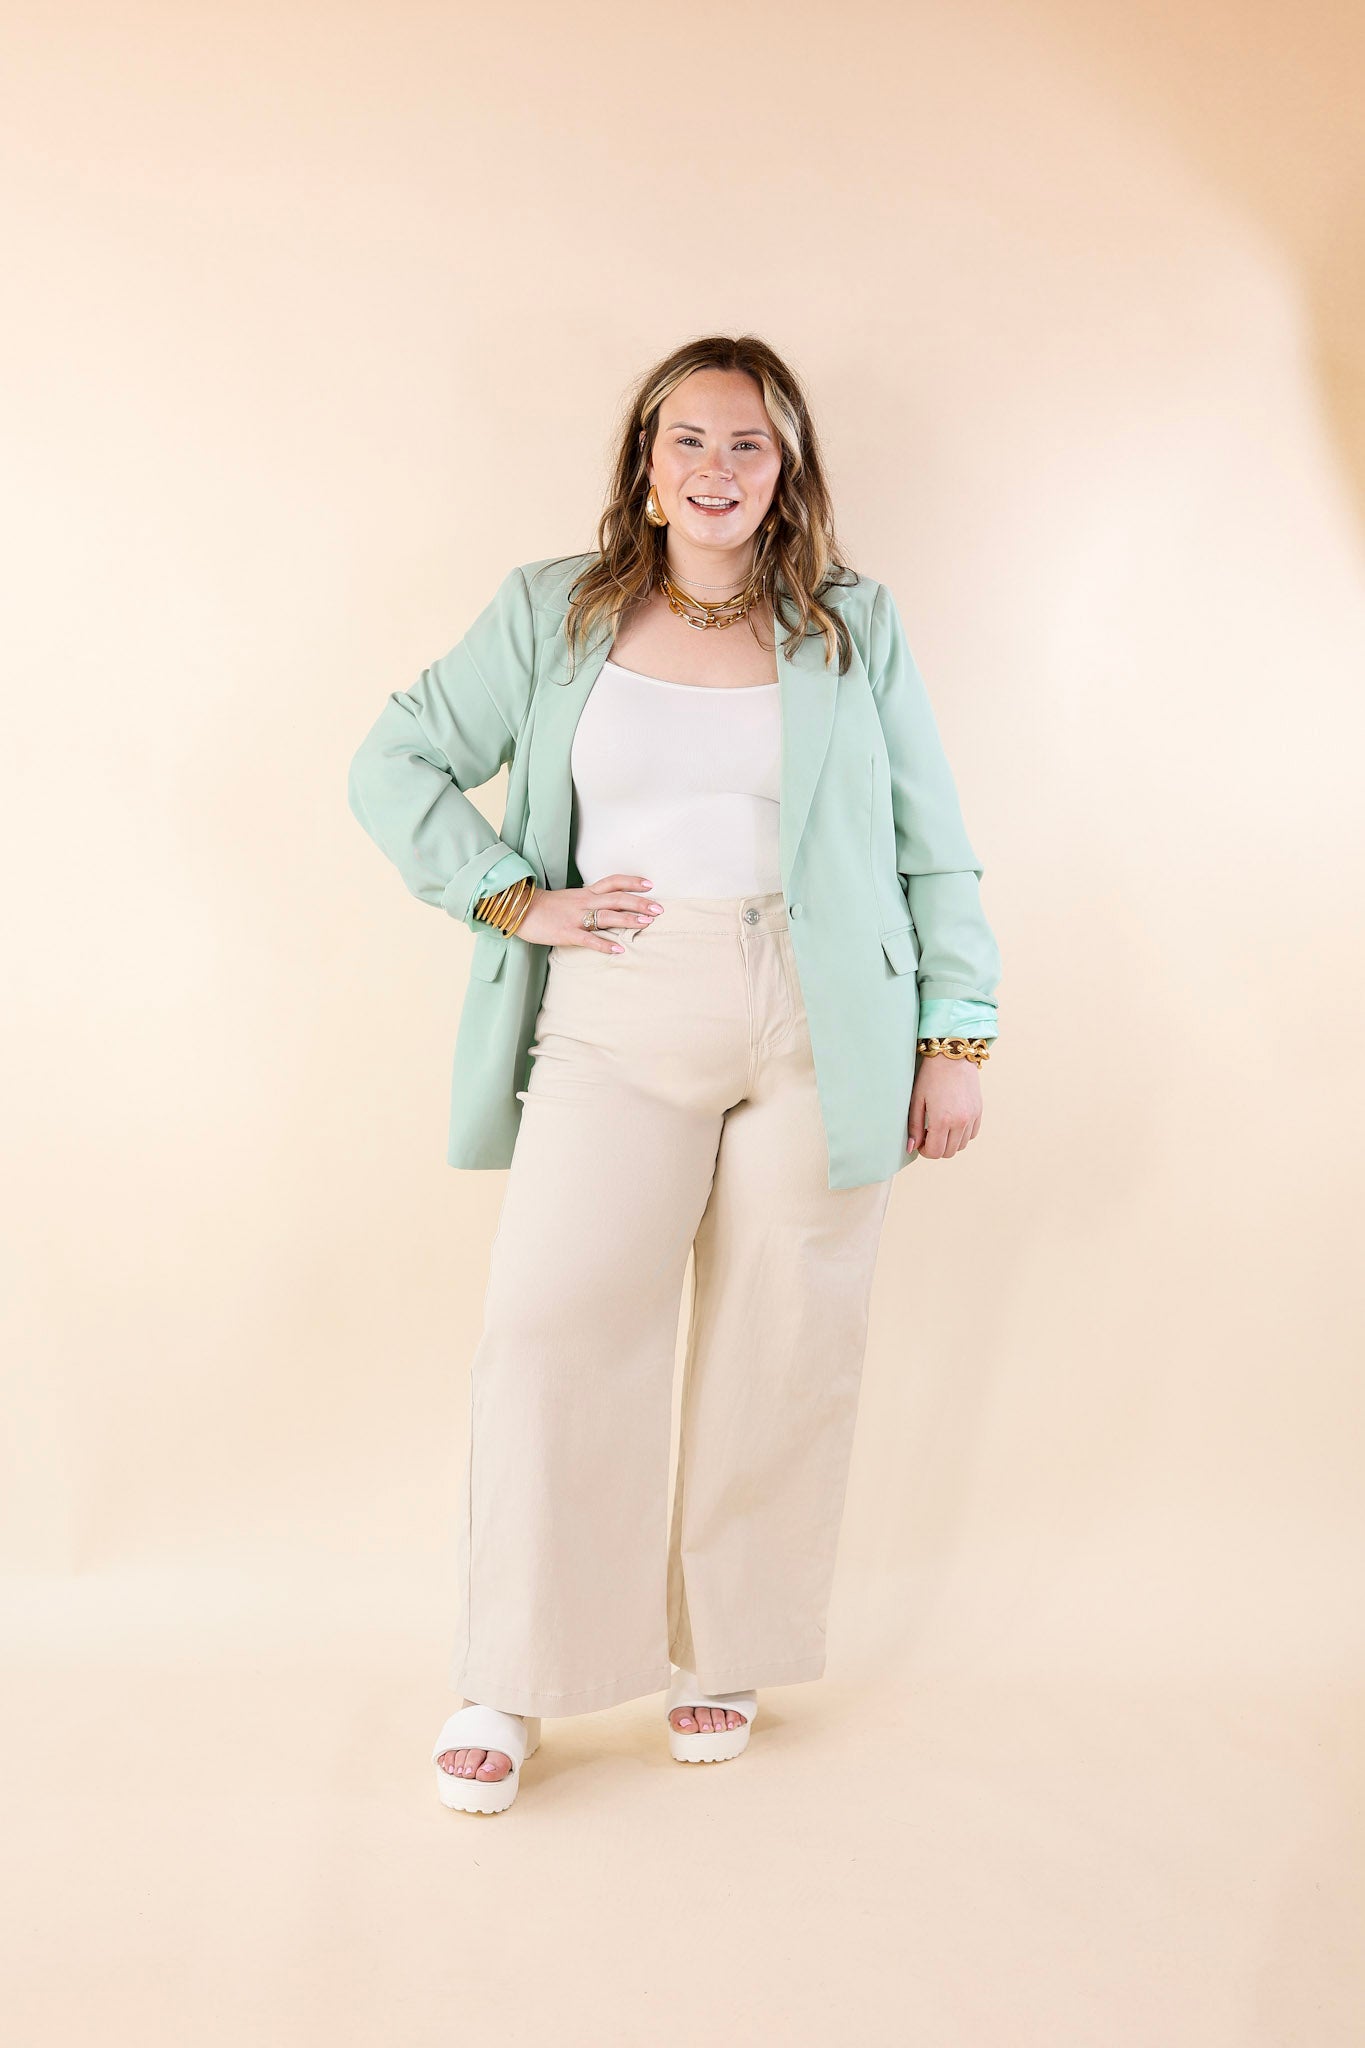 Winning Awards Long Sleeve Blazer in Mint Green - Giddy Up Glamour Boutique